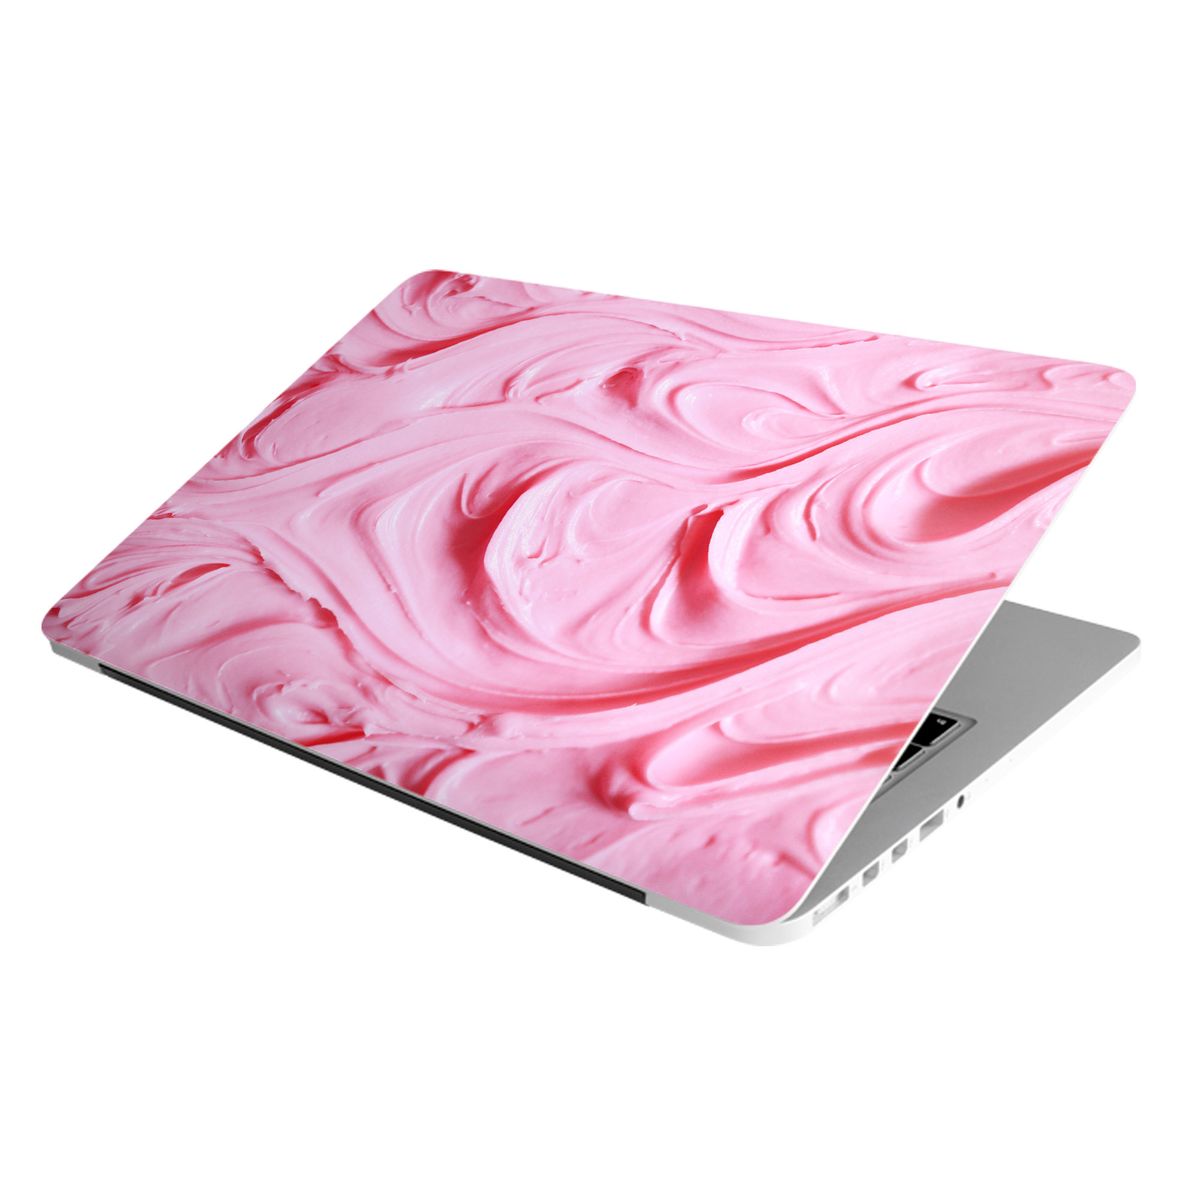 Laptop Skin/Sticker - Pink Icing | Buy Online in South Africa ...